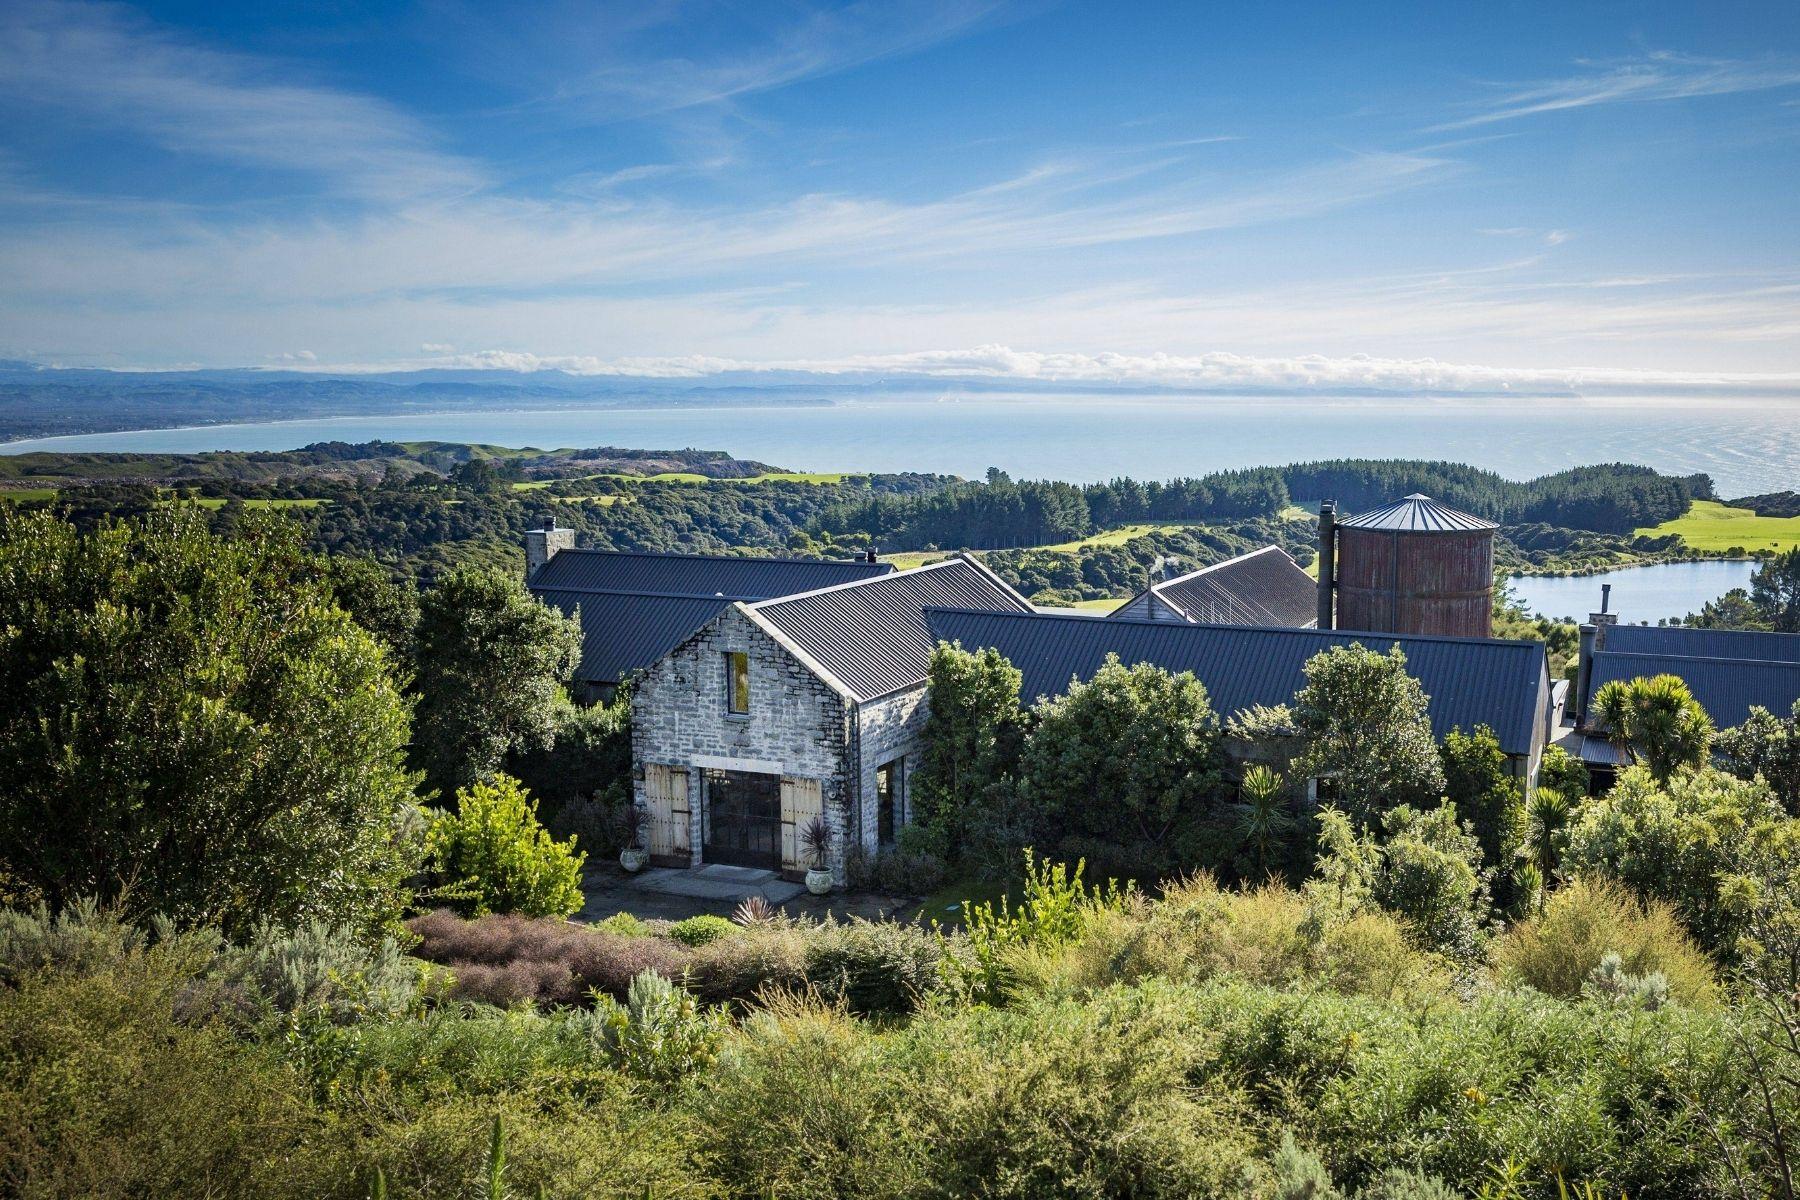 Luxury Lodge in New Zealand - The Farm Cape Kidnappers